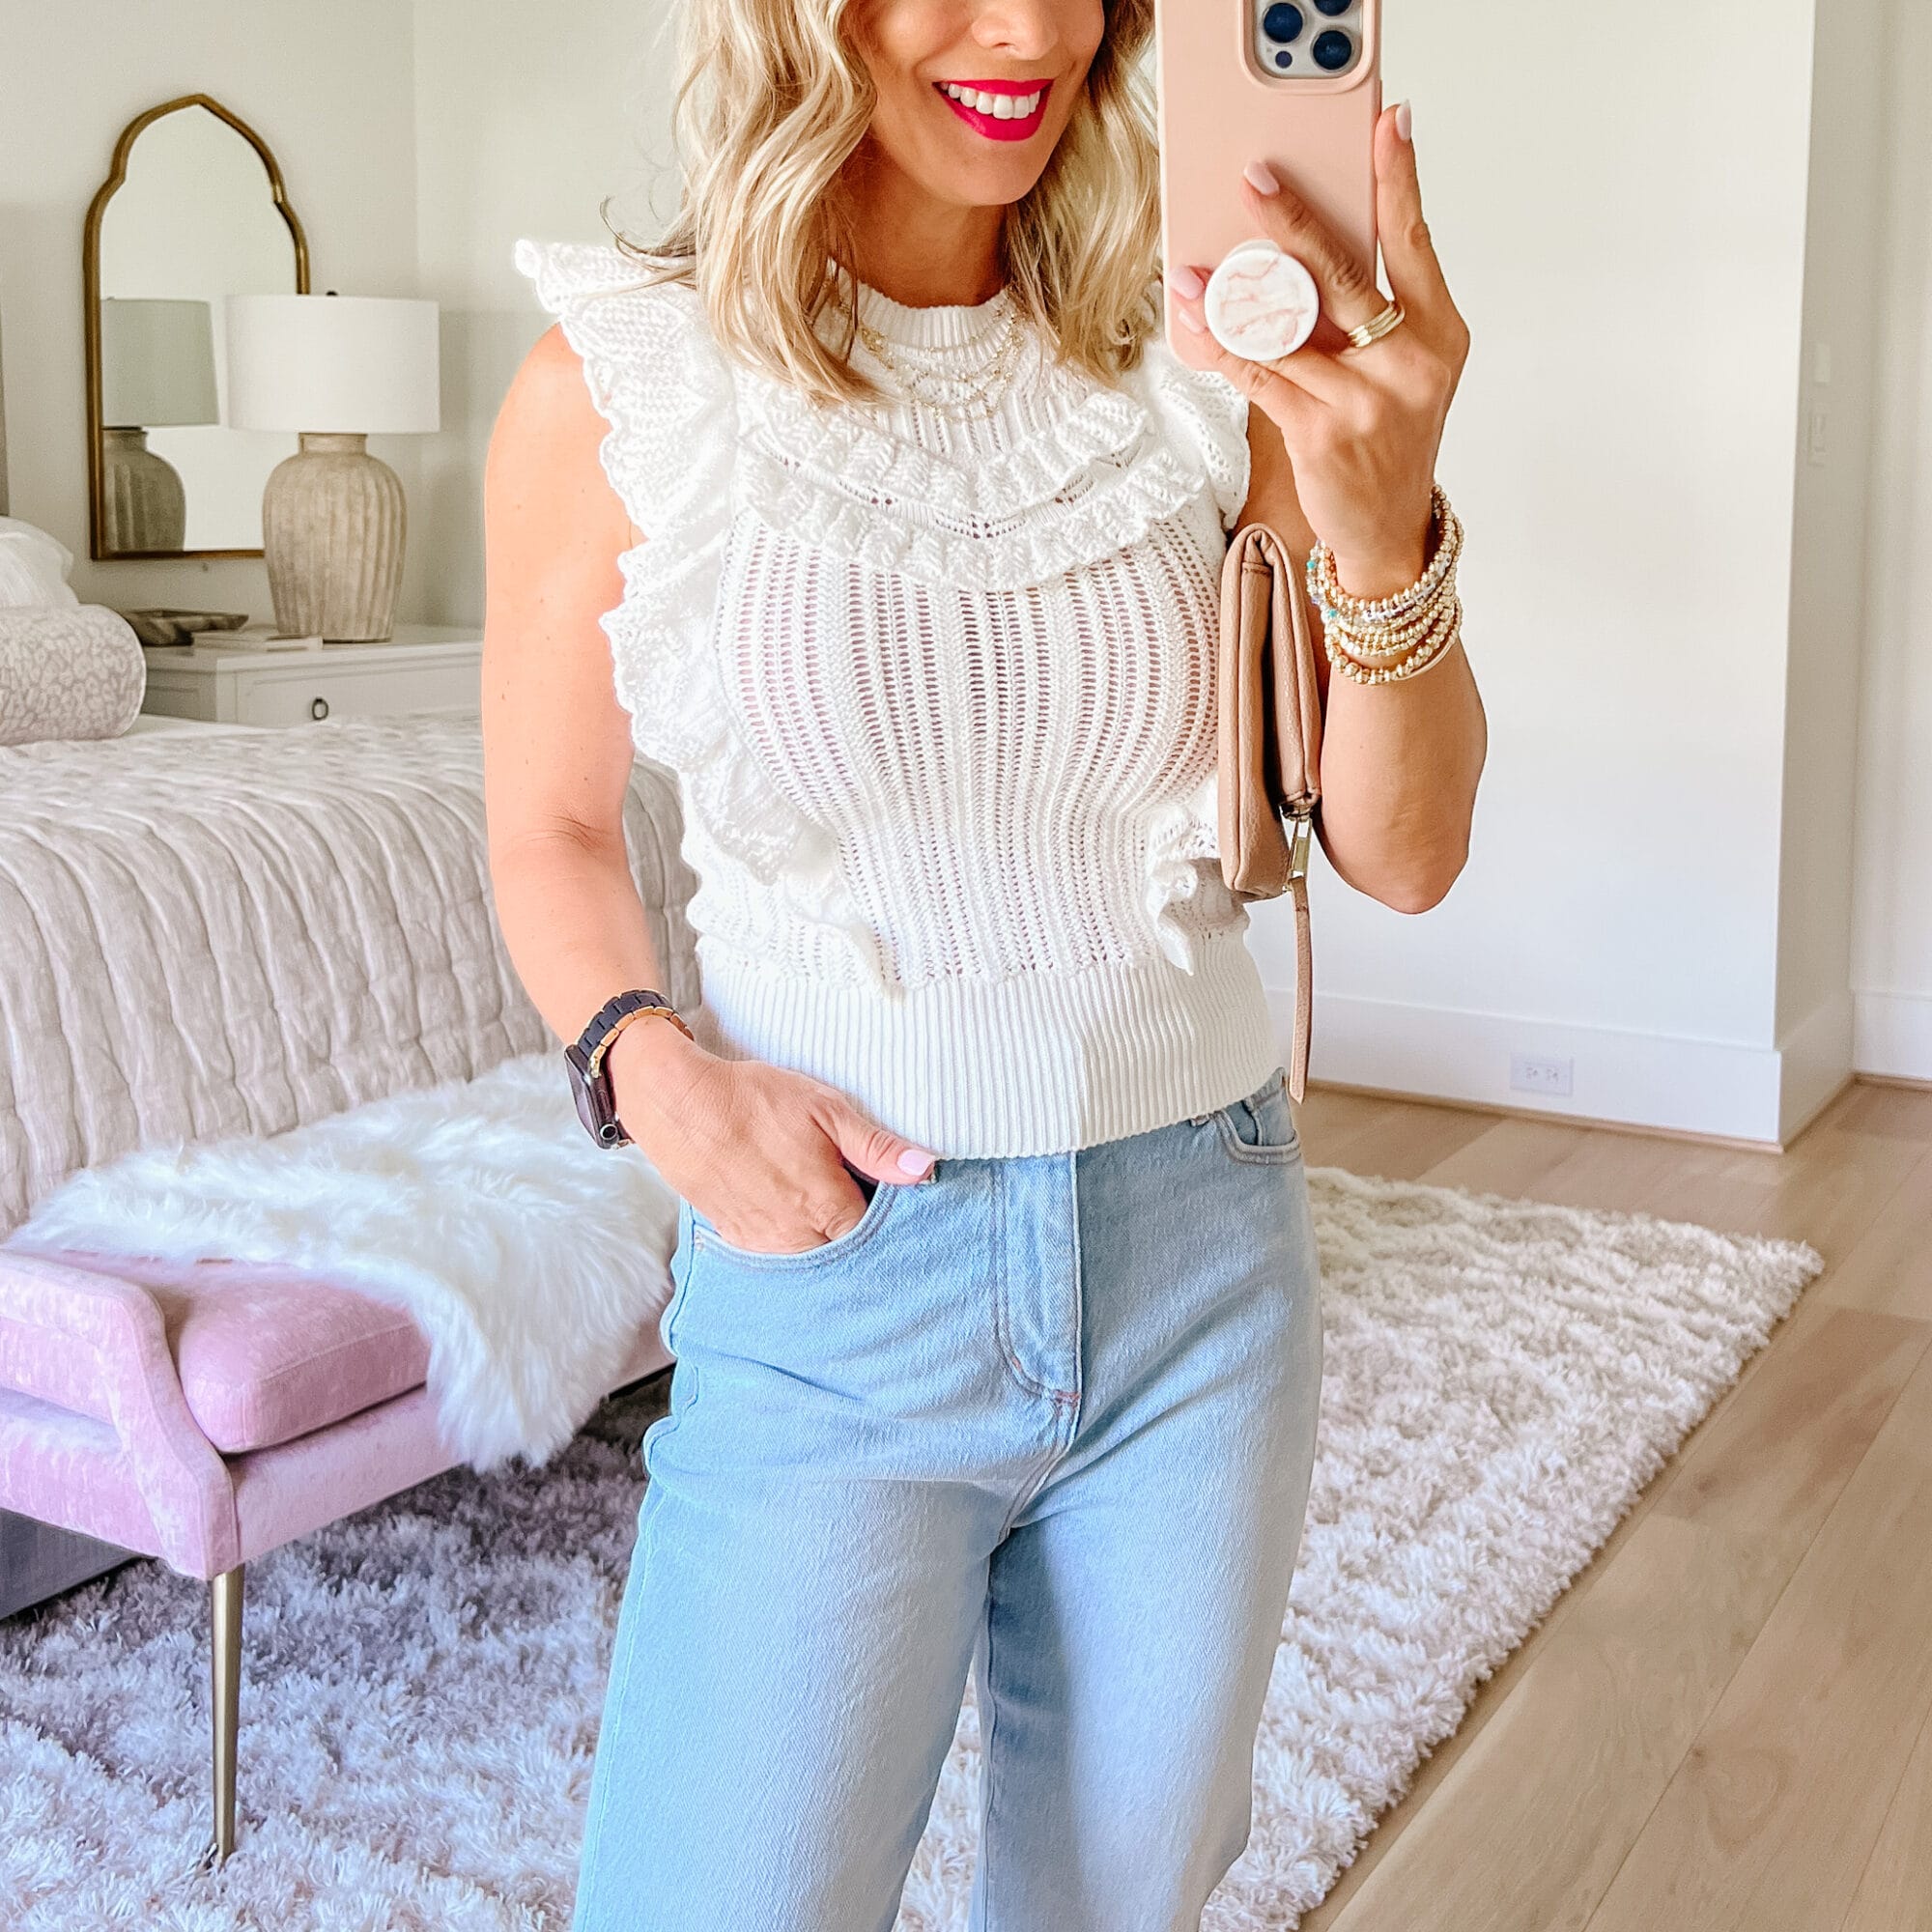 Sleeveless Sweater Top, Jeans, Sandals, Clutch 